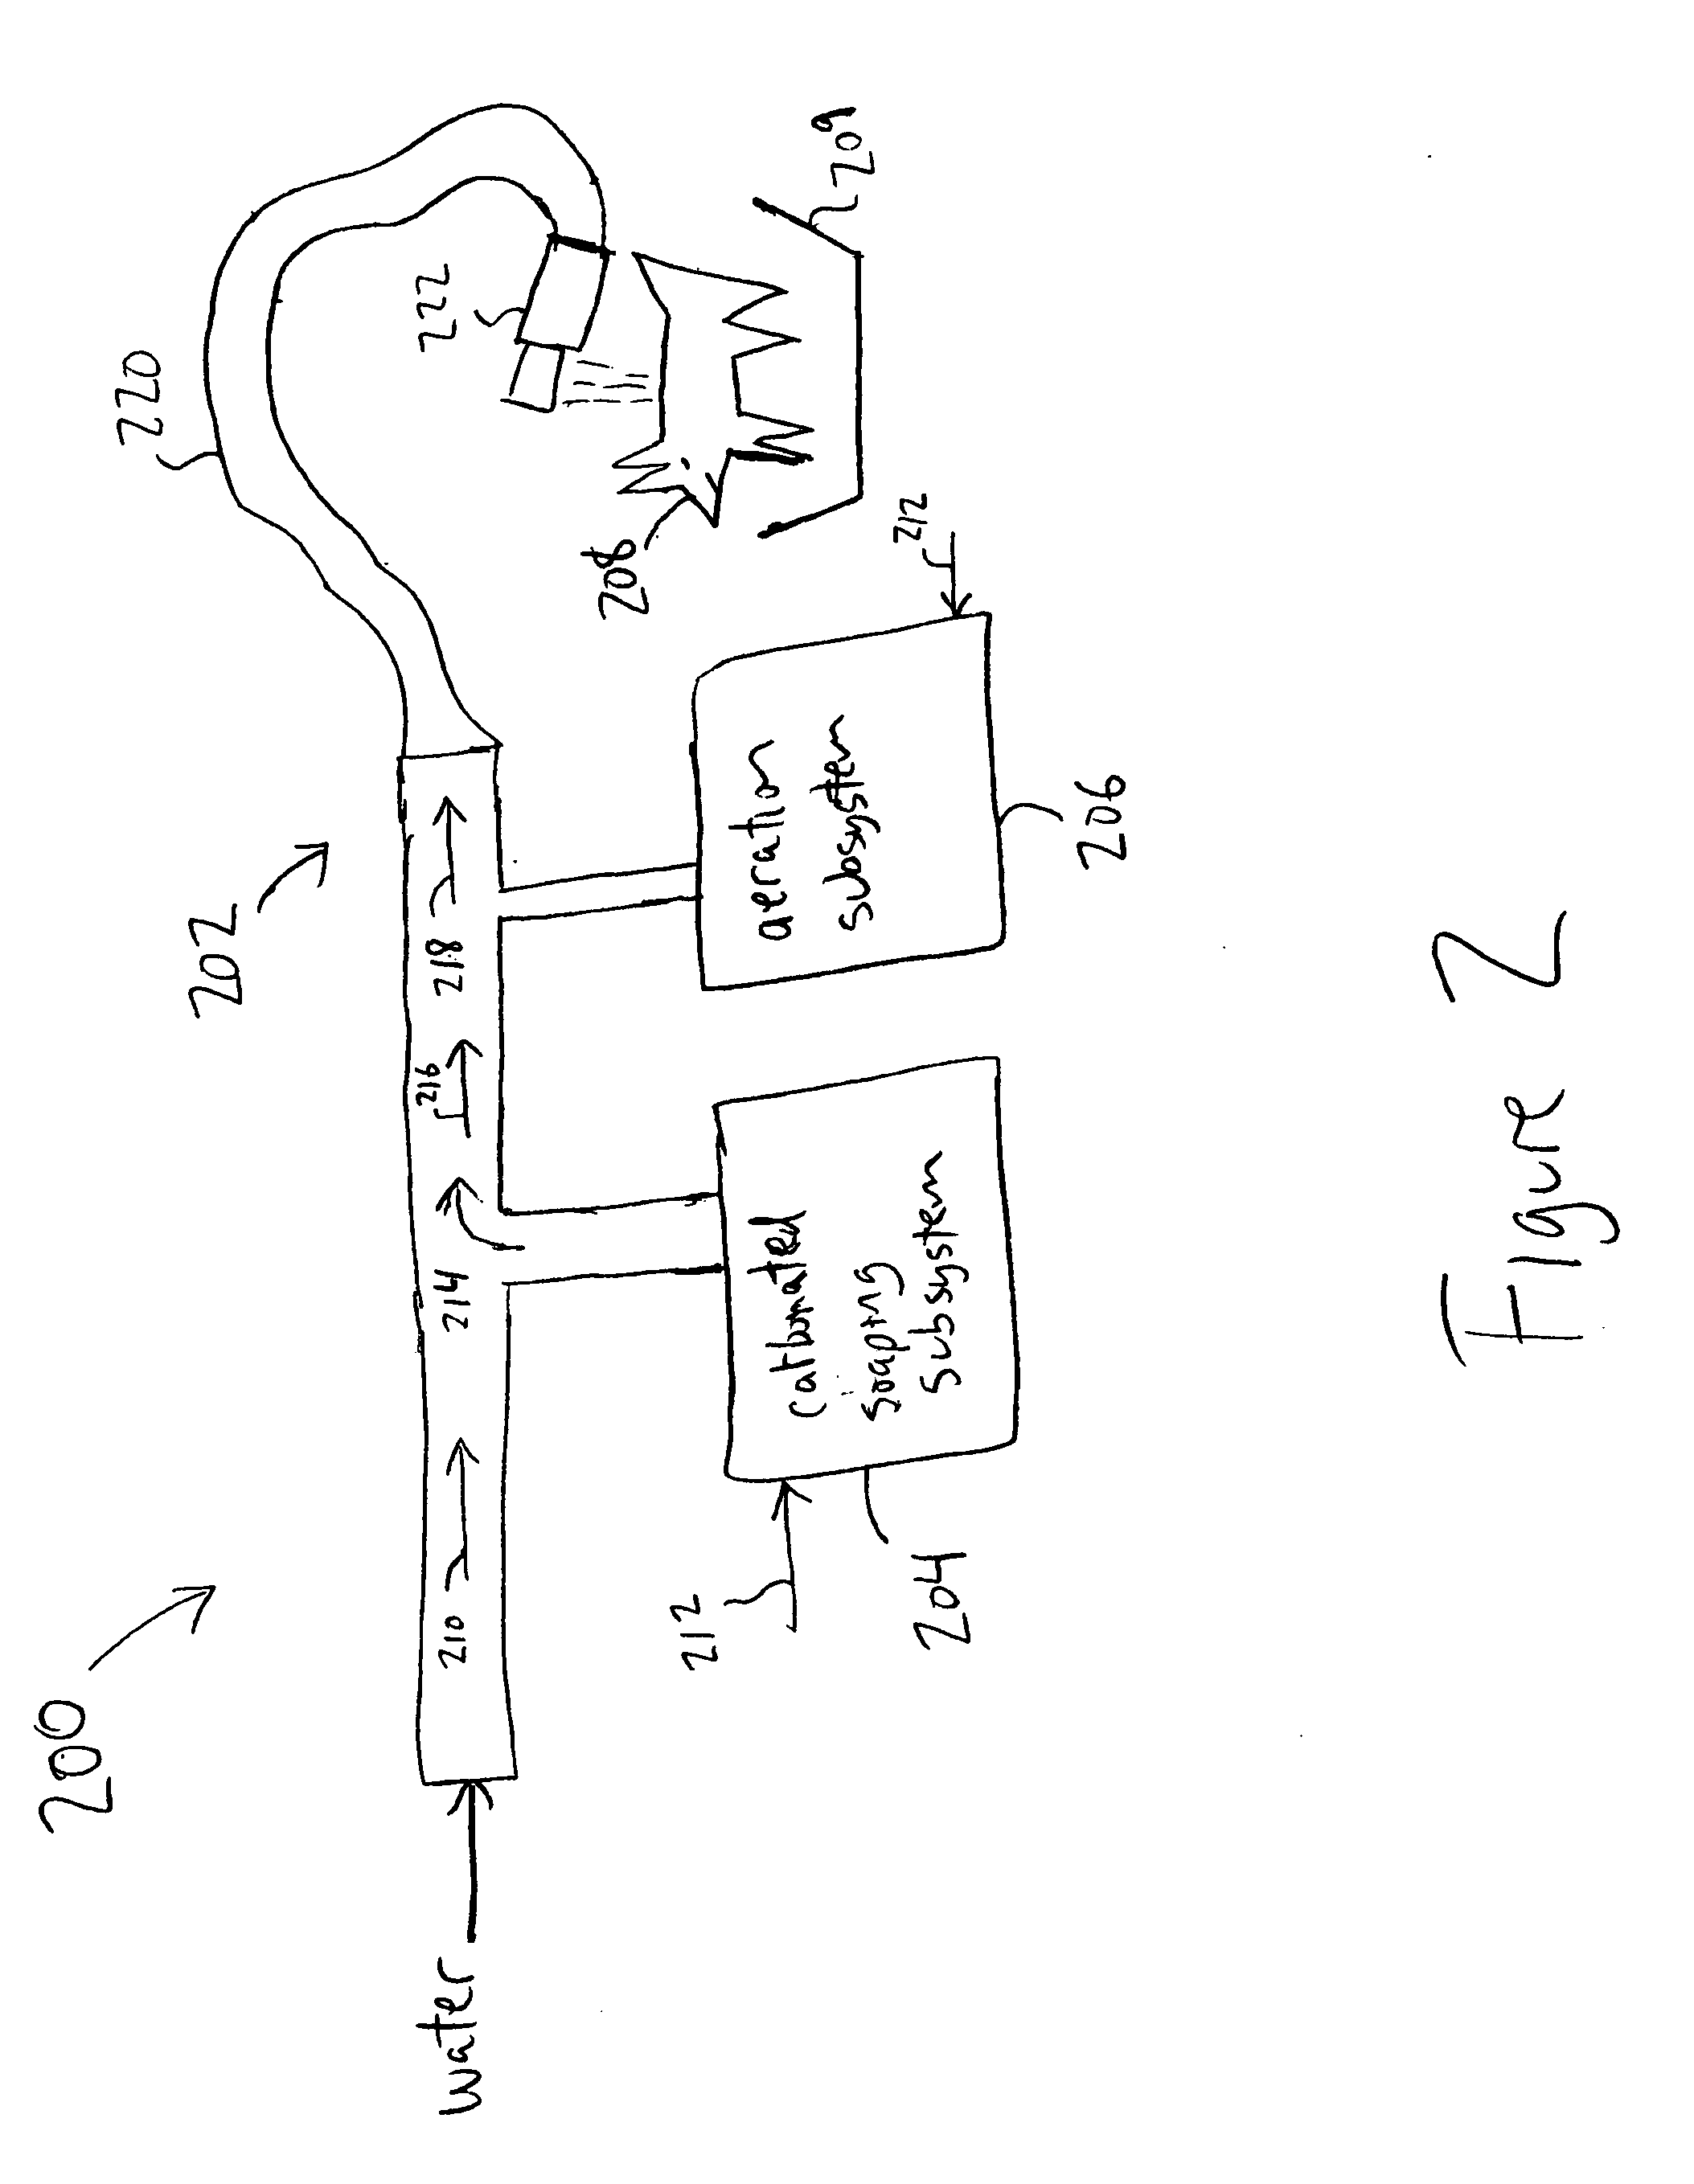 Animal or other object washing system and method